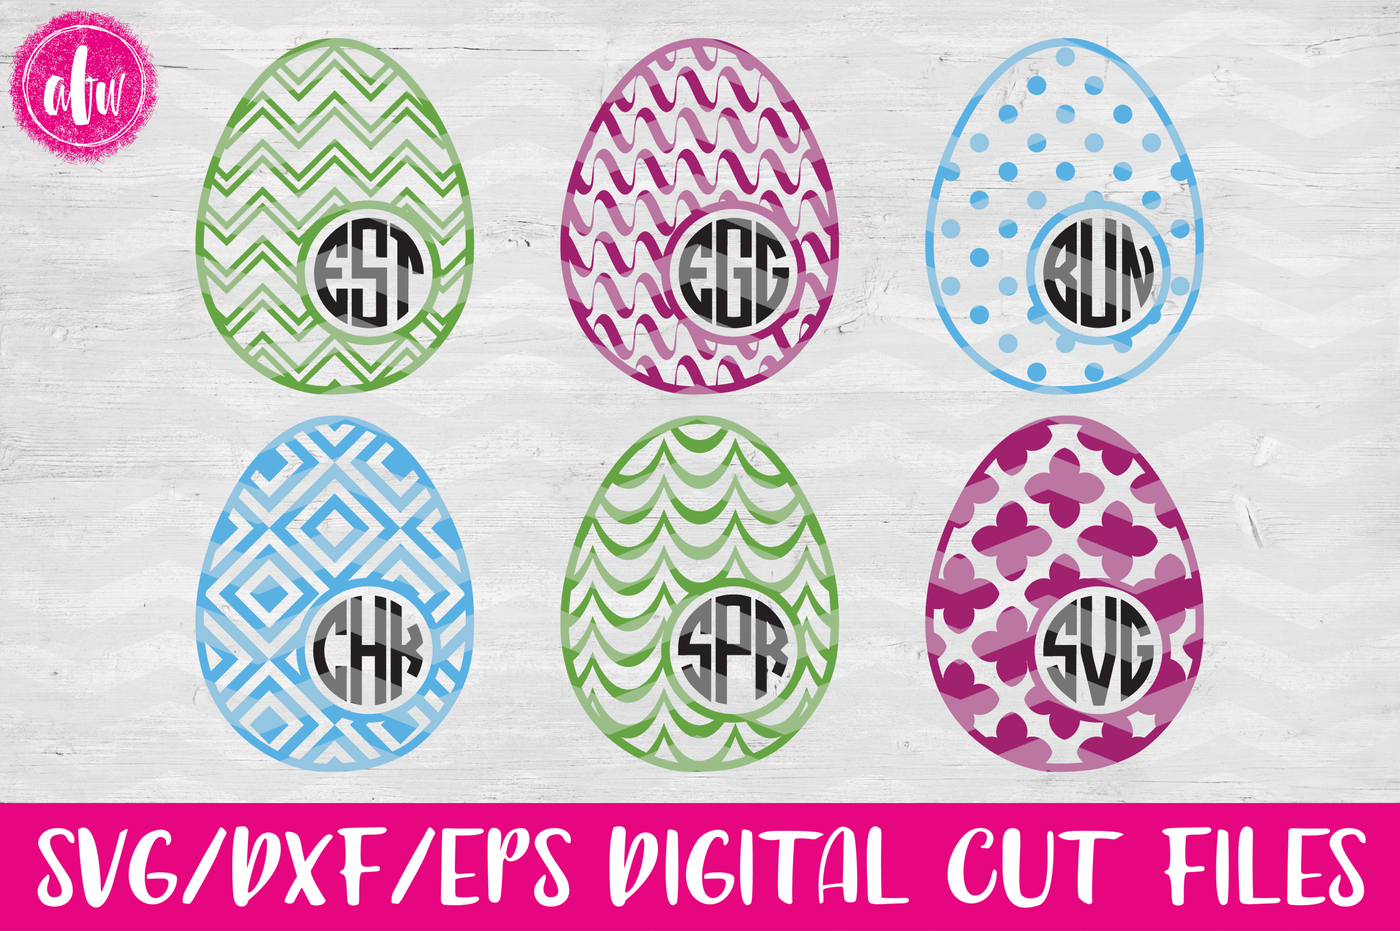 Download Patterned Monogram Easter Eggs Set #2 - SVG, DXF, EPS Cut Files By AFW Designs | TheHungryJPEG.com